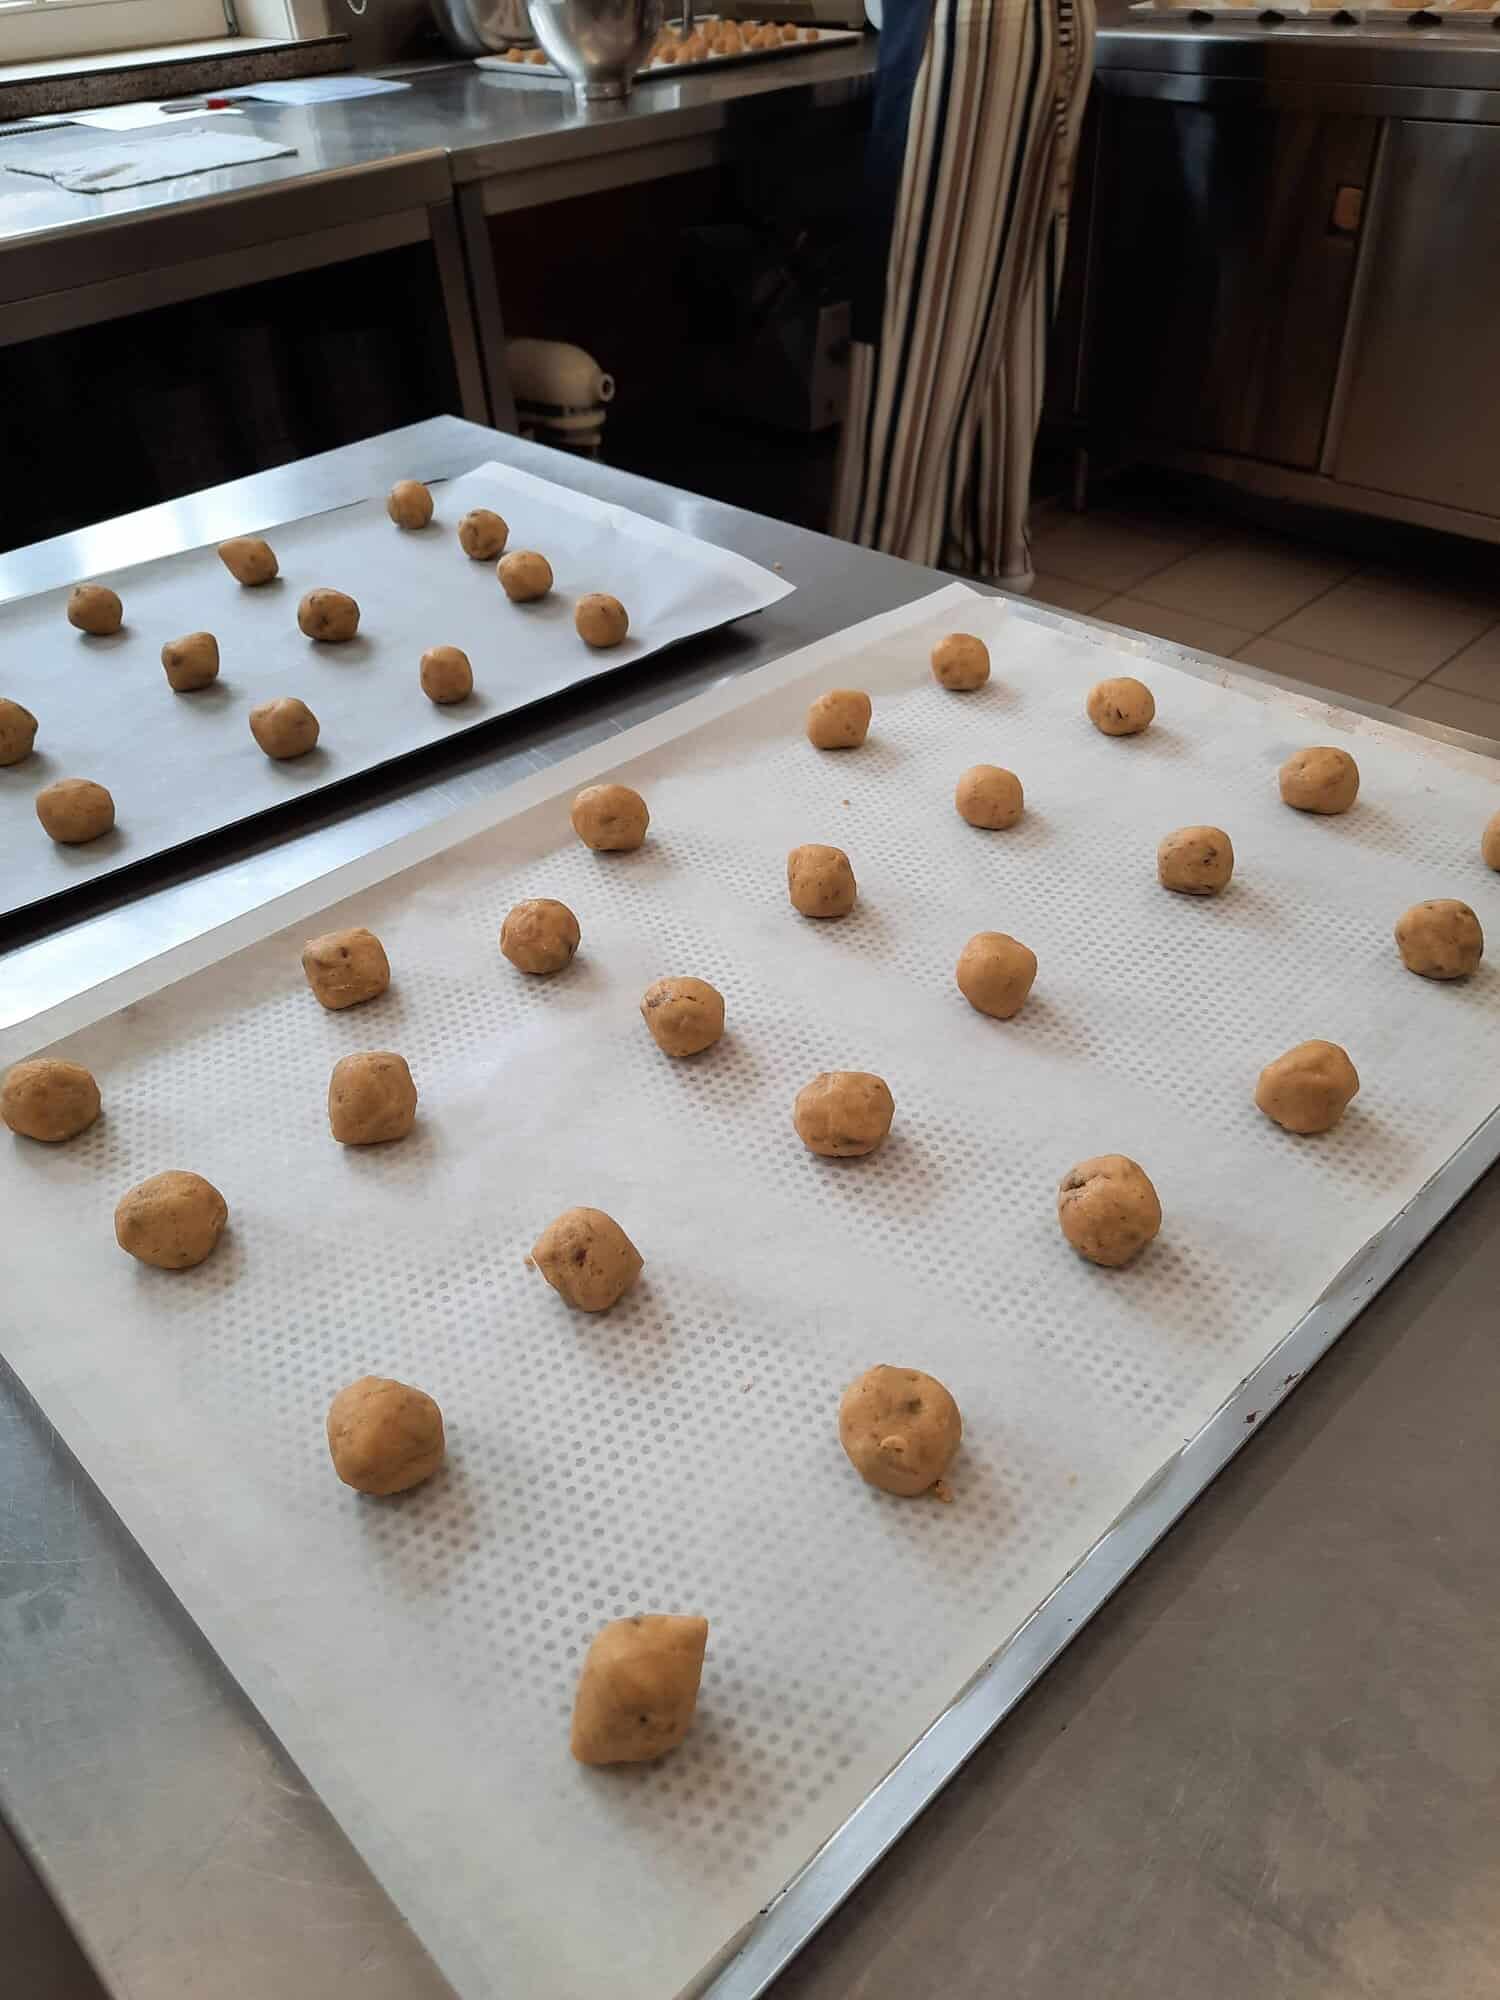 Cut the dough into 44 balls, each ball is about 15g